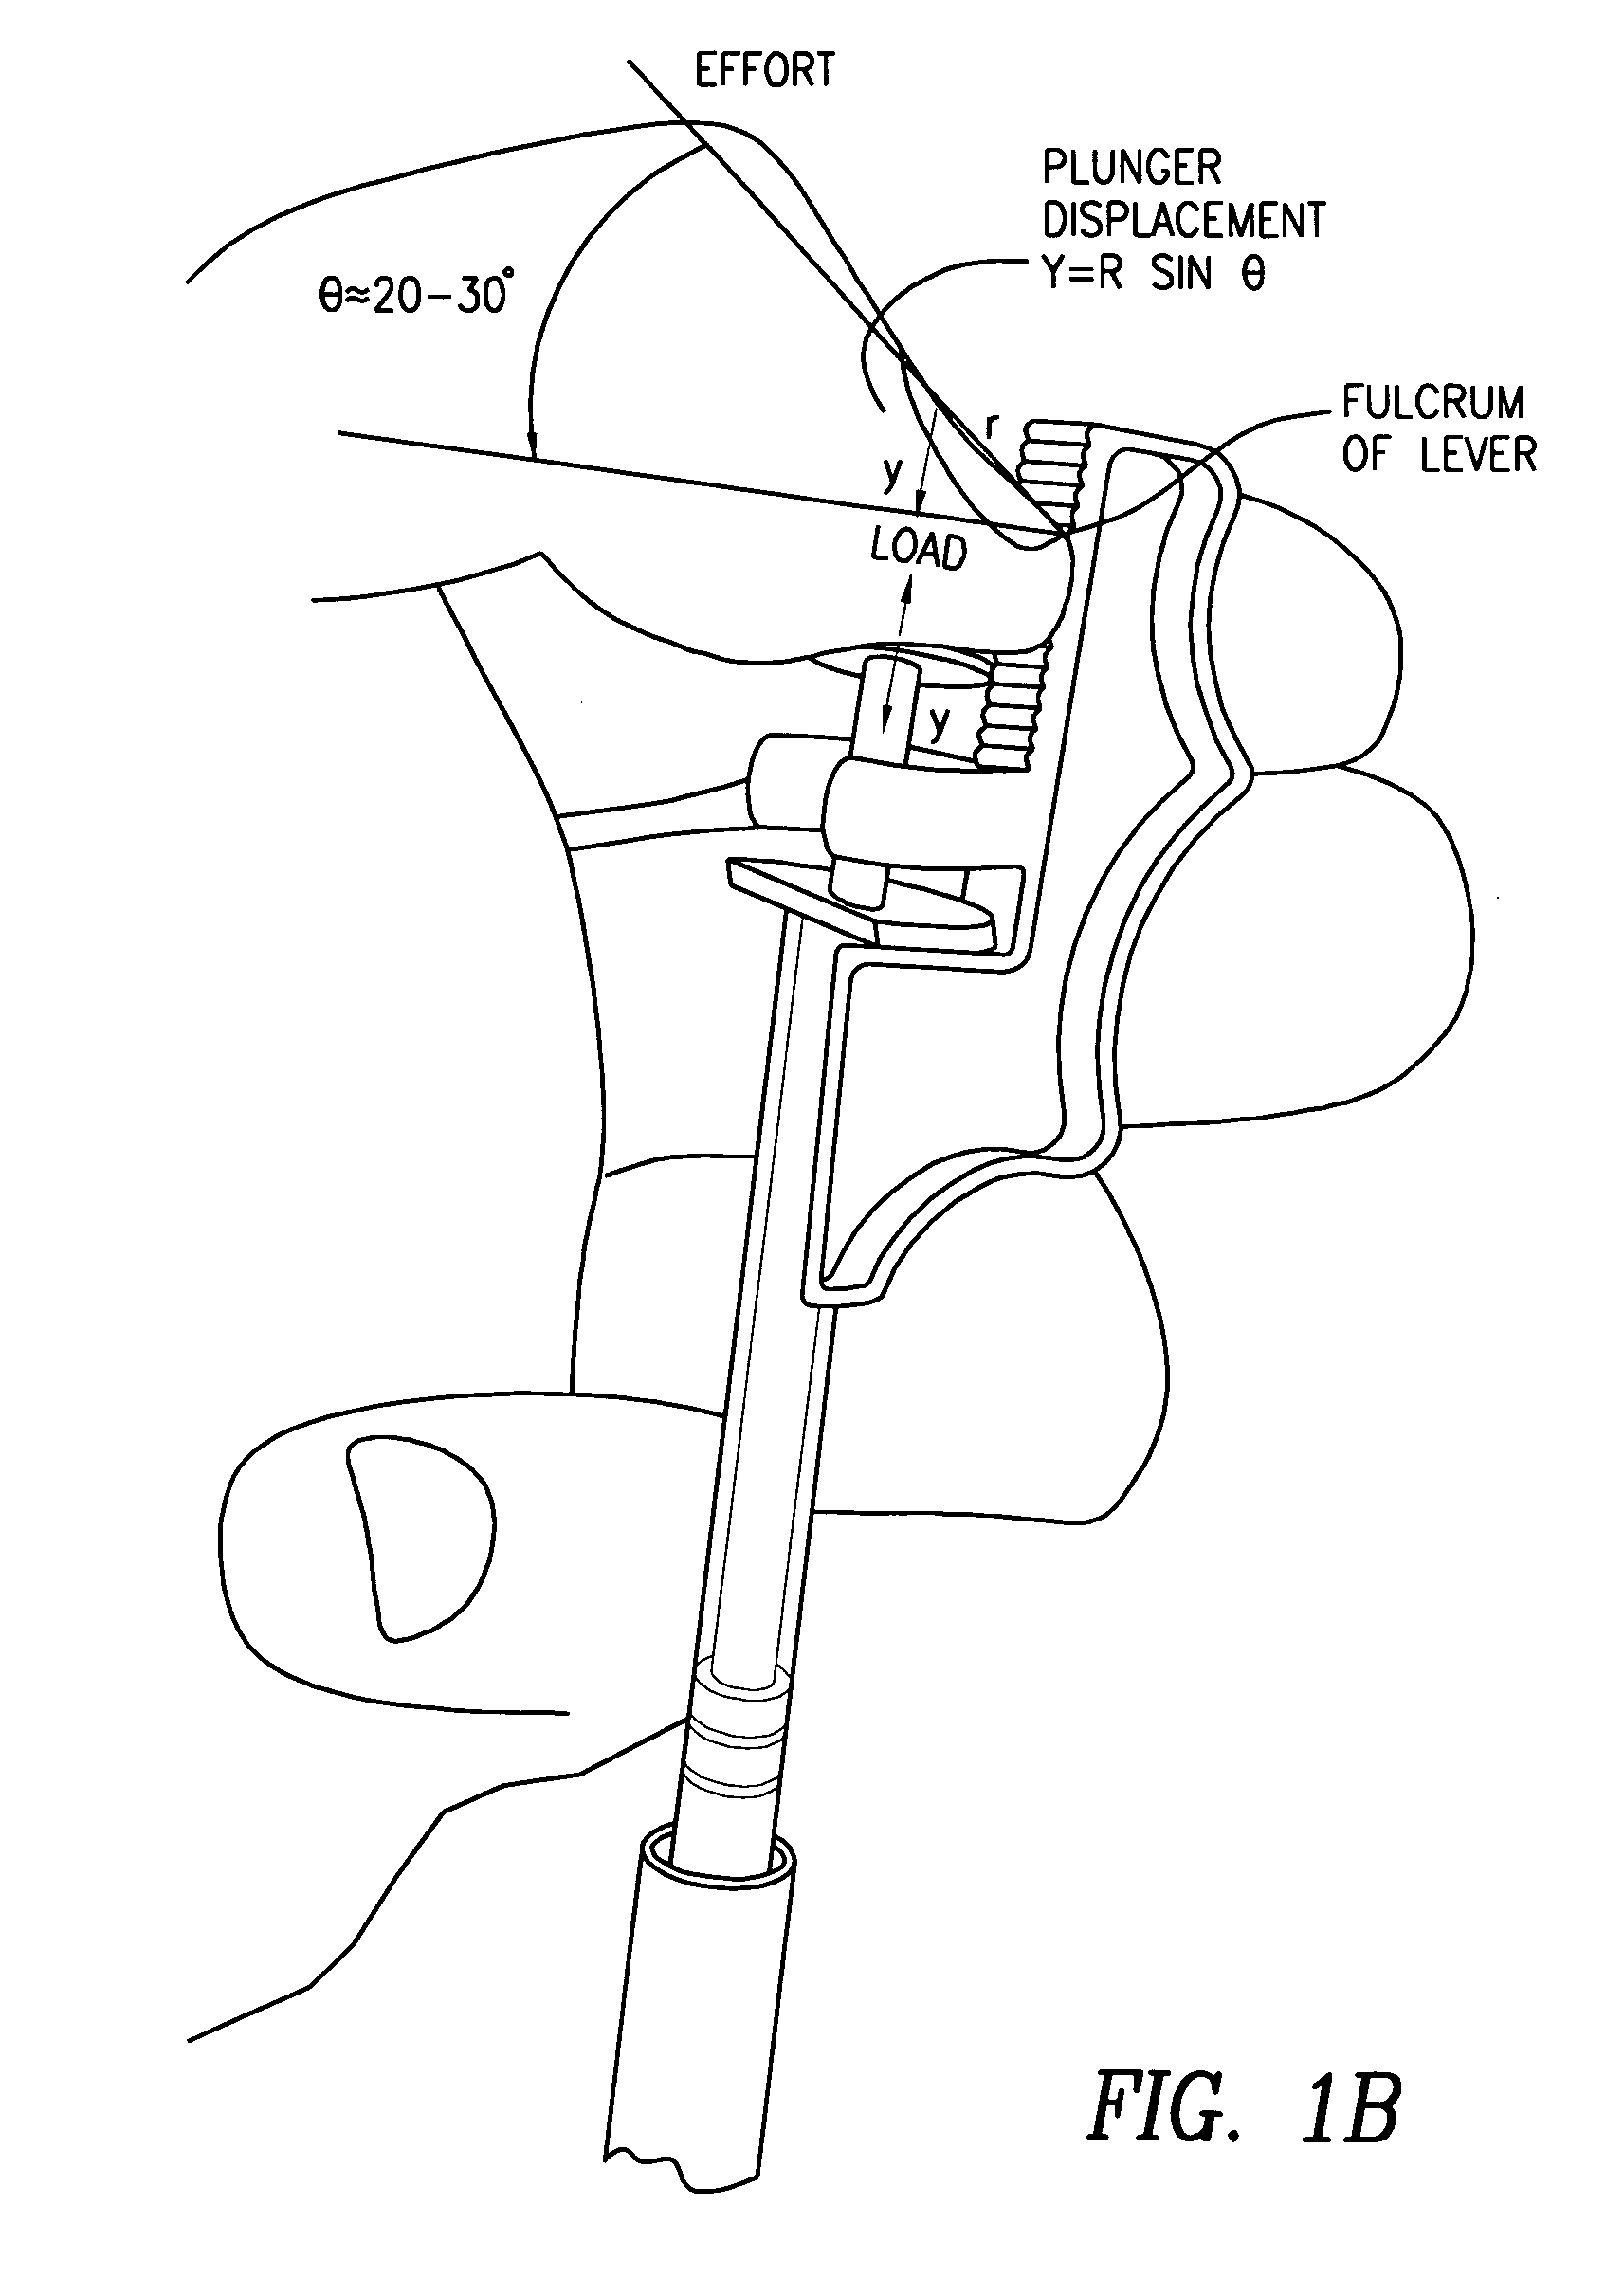 Device for manually controlling delivery rate of a hypodermic syringe and syringe having same